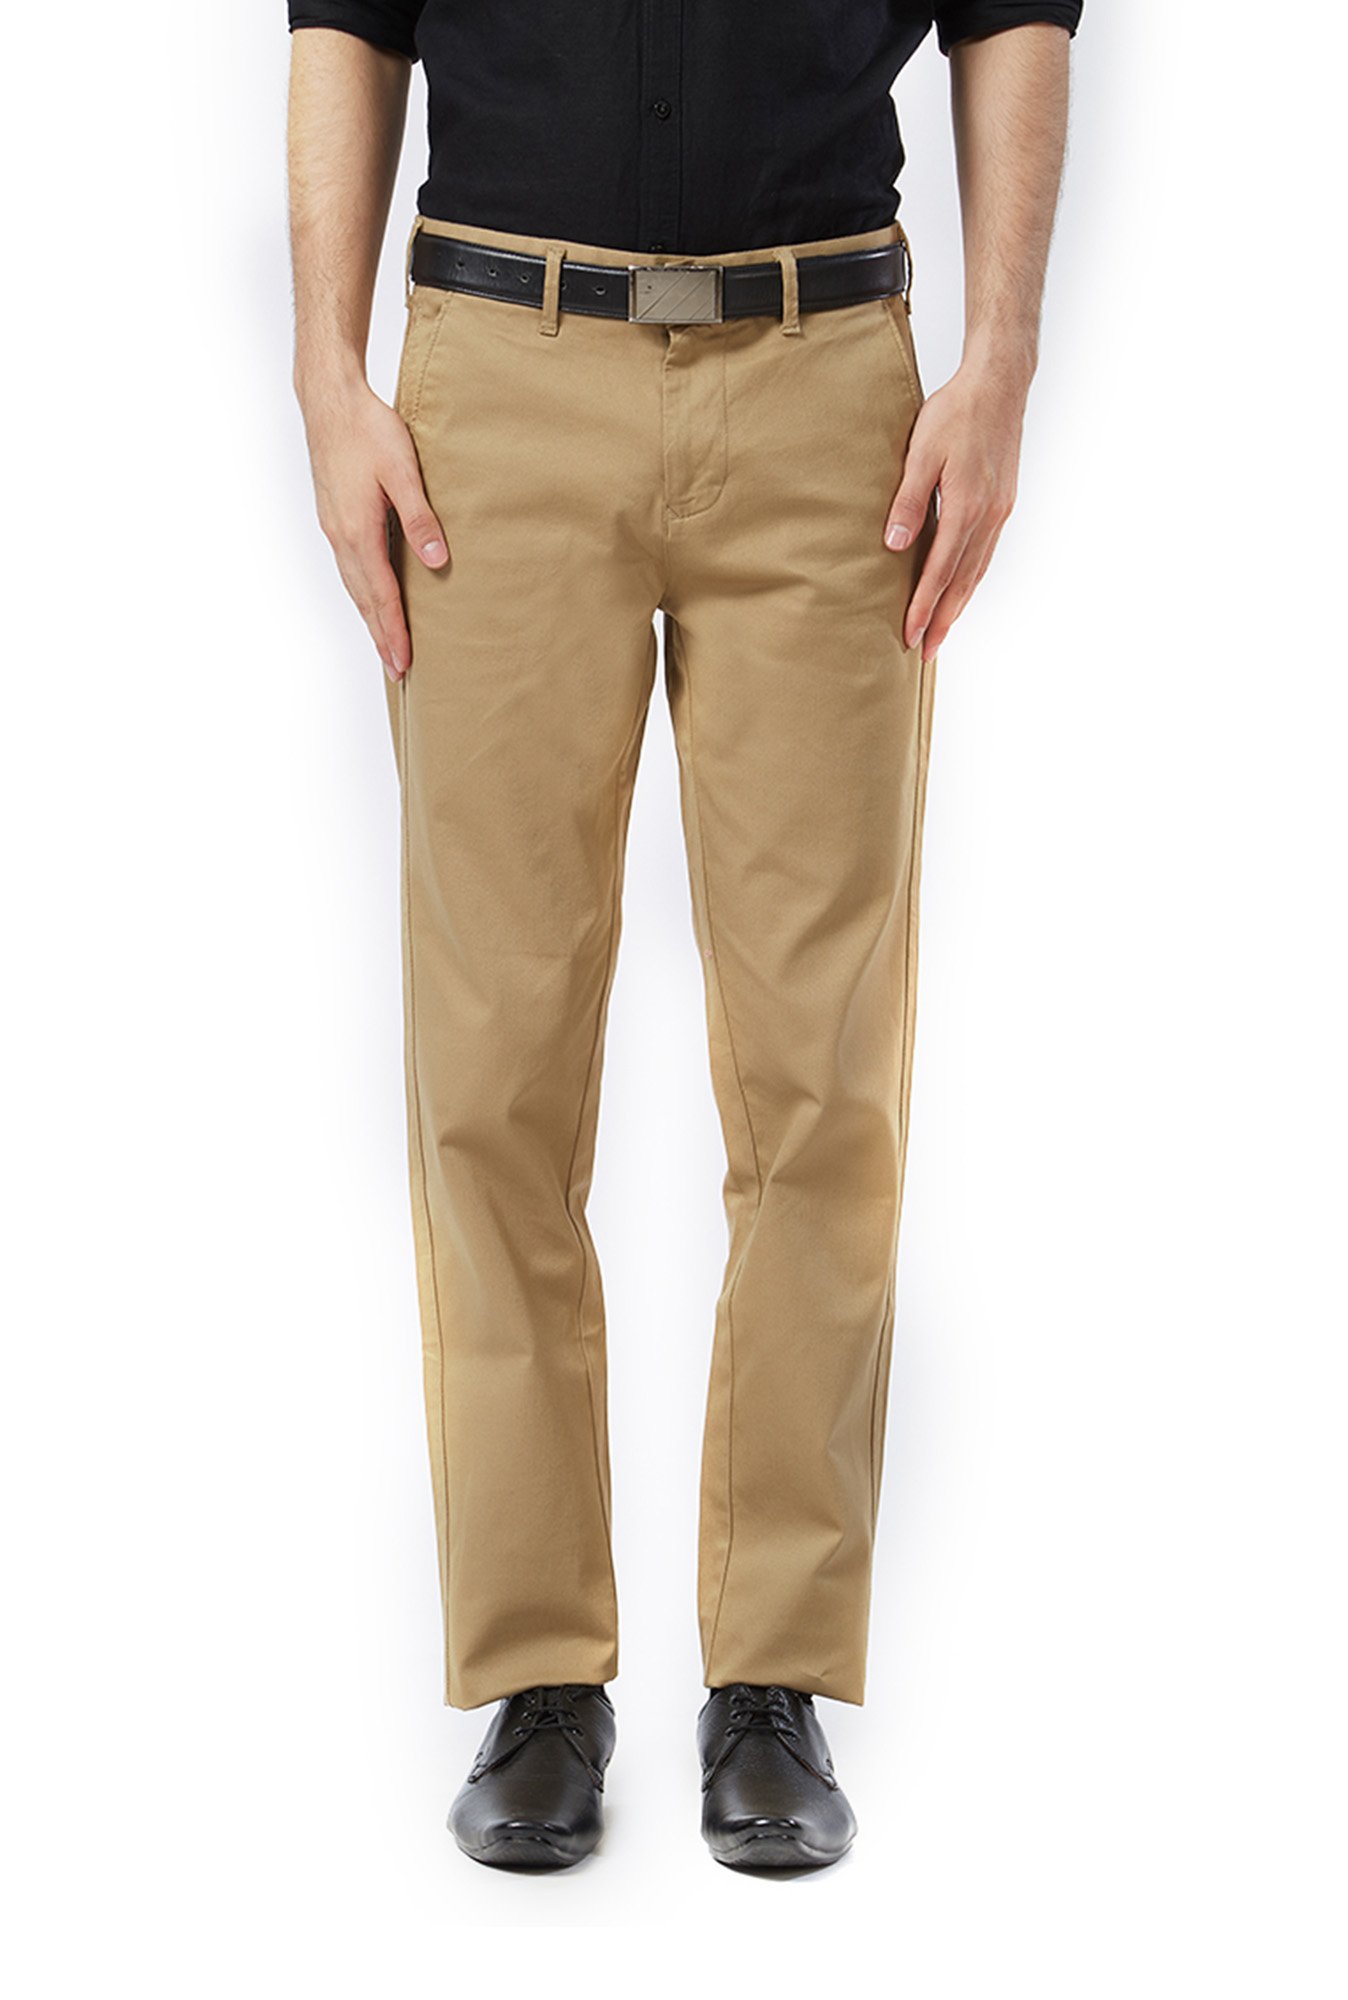 Buy Easies by Killer Blue Slim Fit Chinos for Mens Online  Tata CLiQ